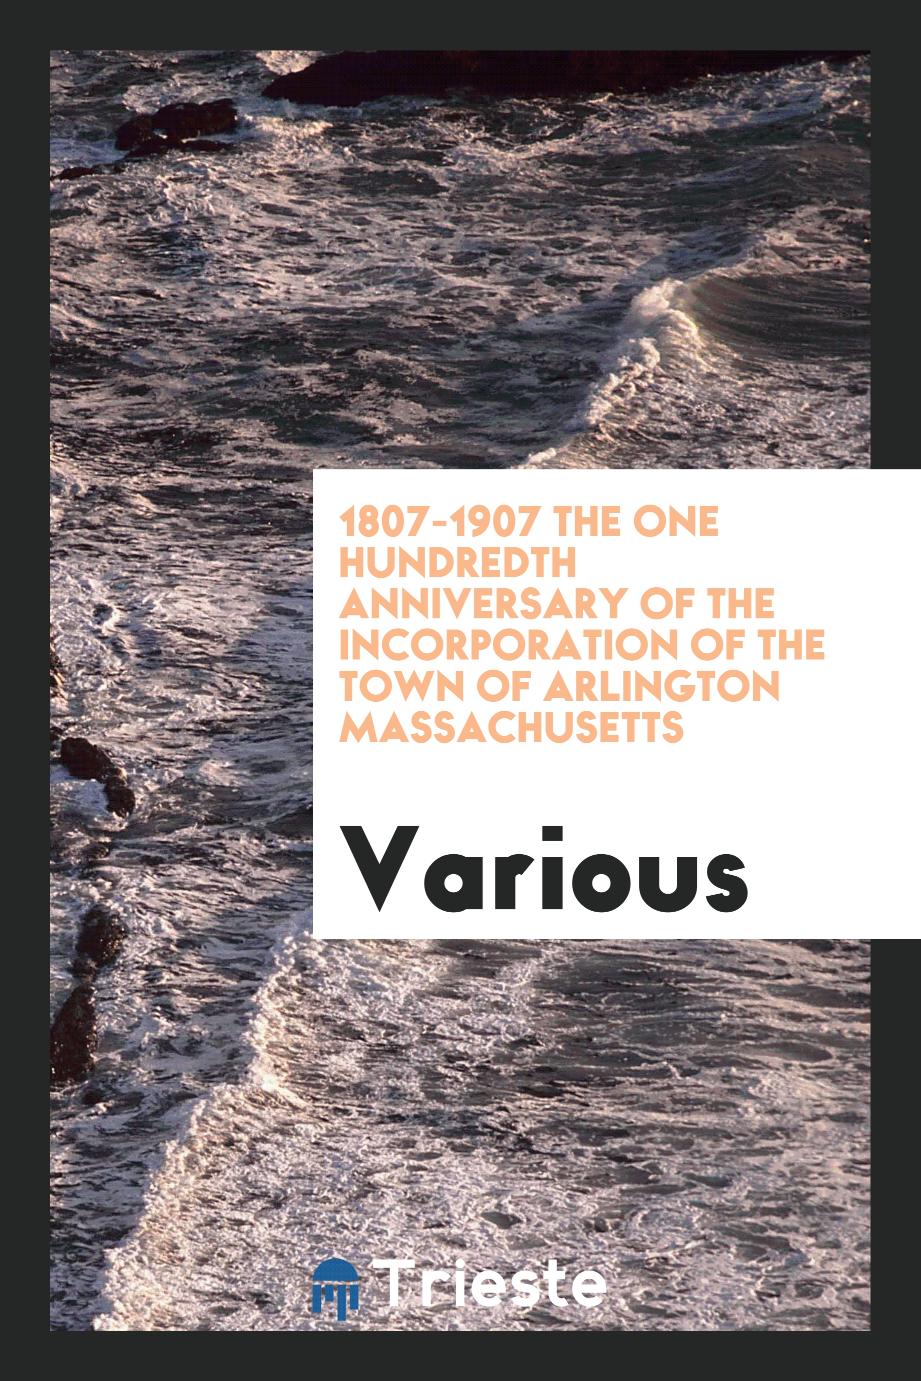 1807-1907 The One Hundredth Anniversary of the incorporation of the Town of Arlington Massachusetts